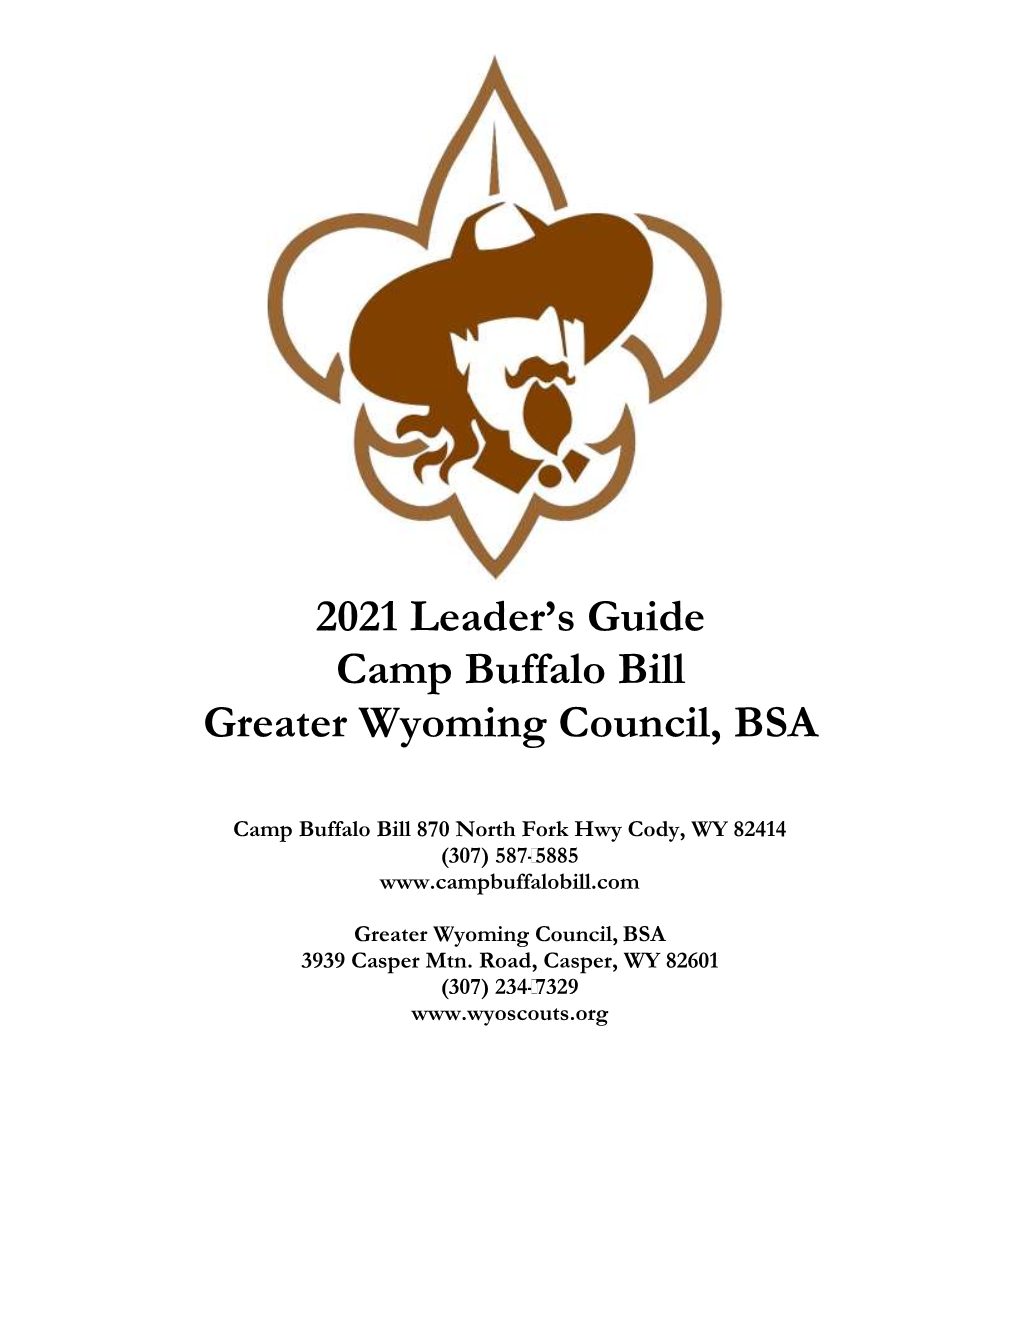 2021 Leader's Guide Camp Buffalo Bill Greater Wyoming Council